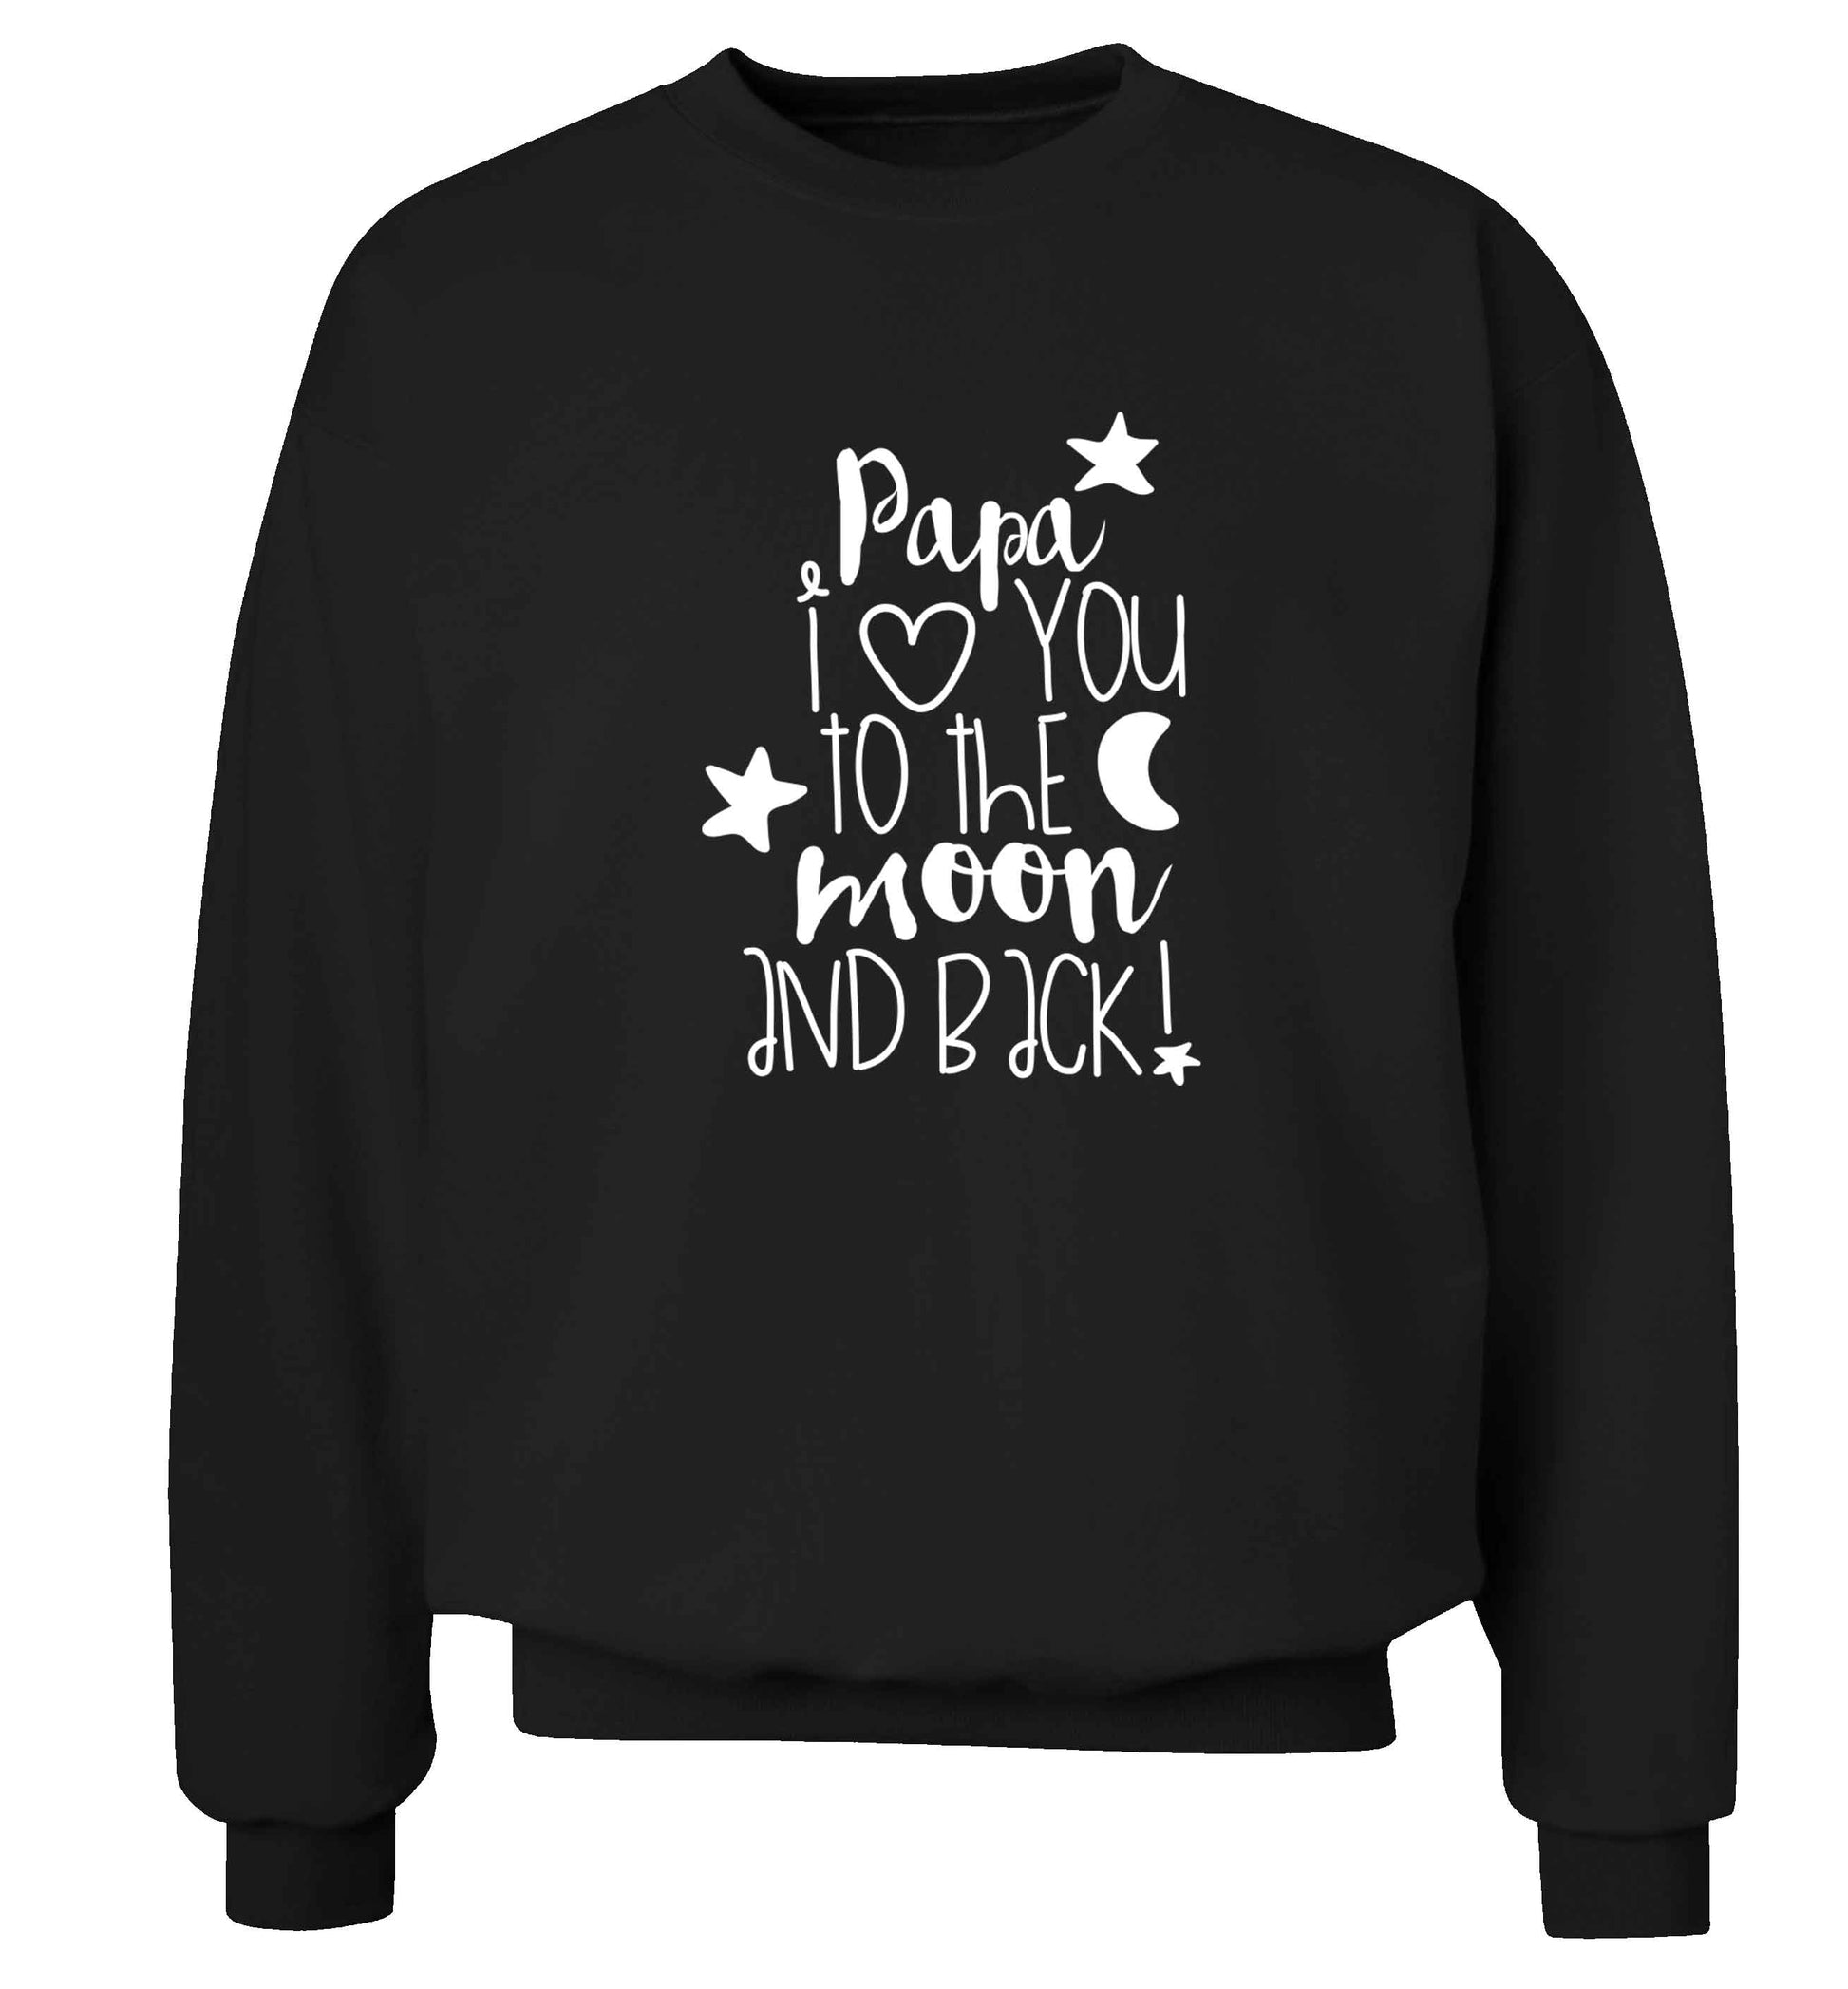 Papa I love you to the moon and back adult's unisex black sweater 2XL